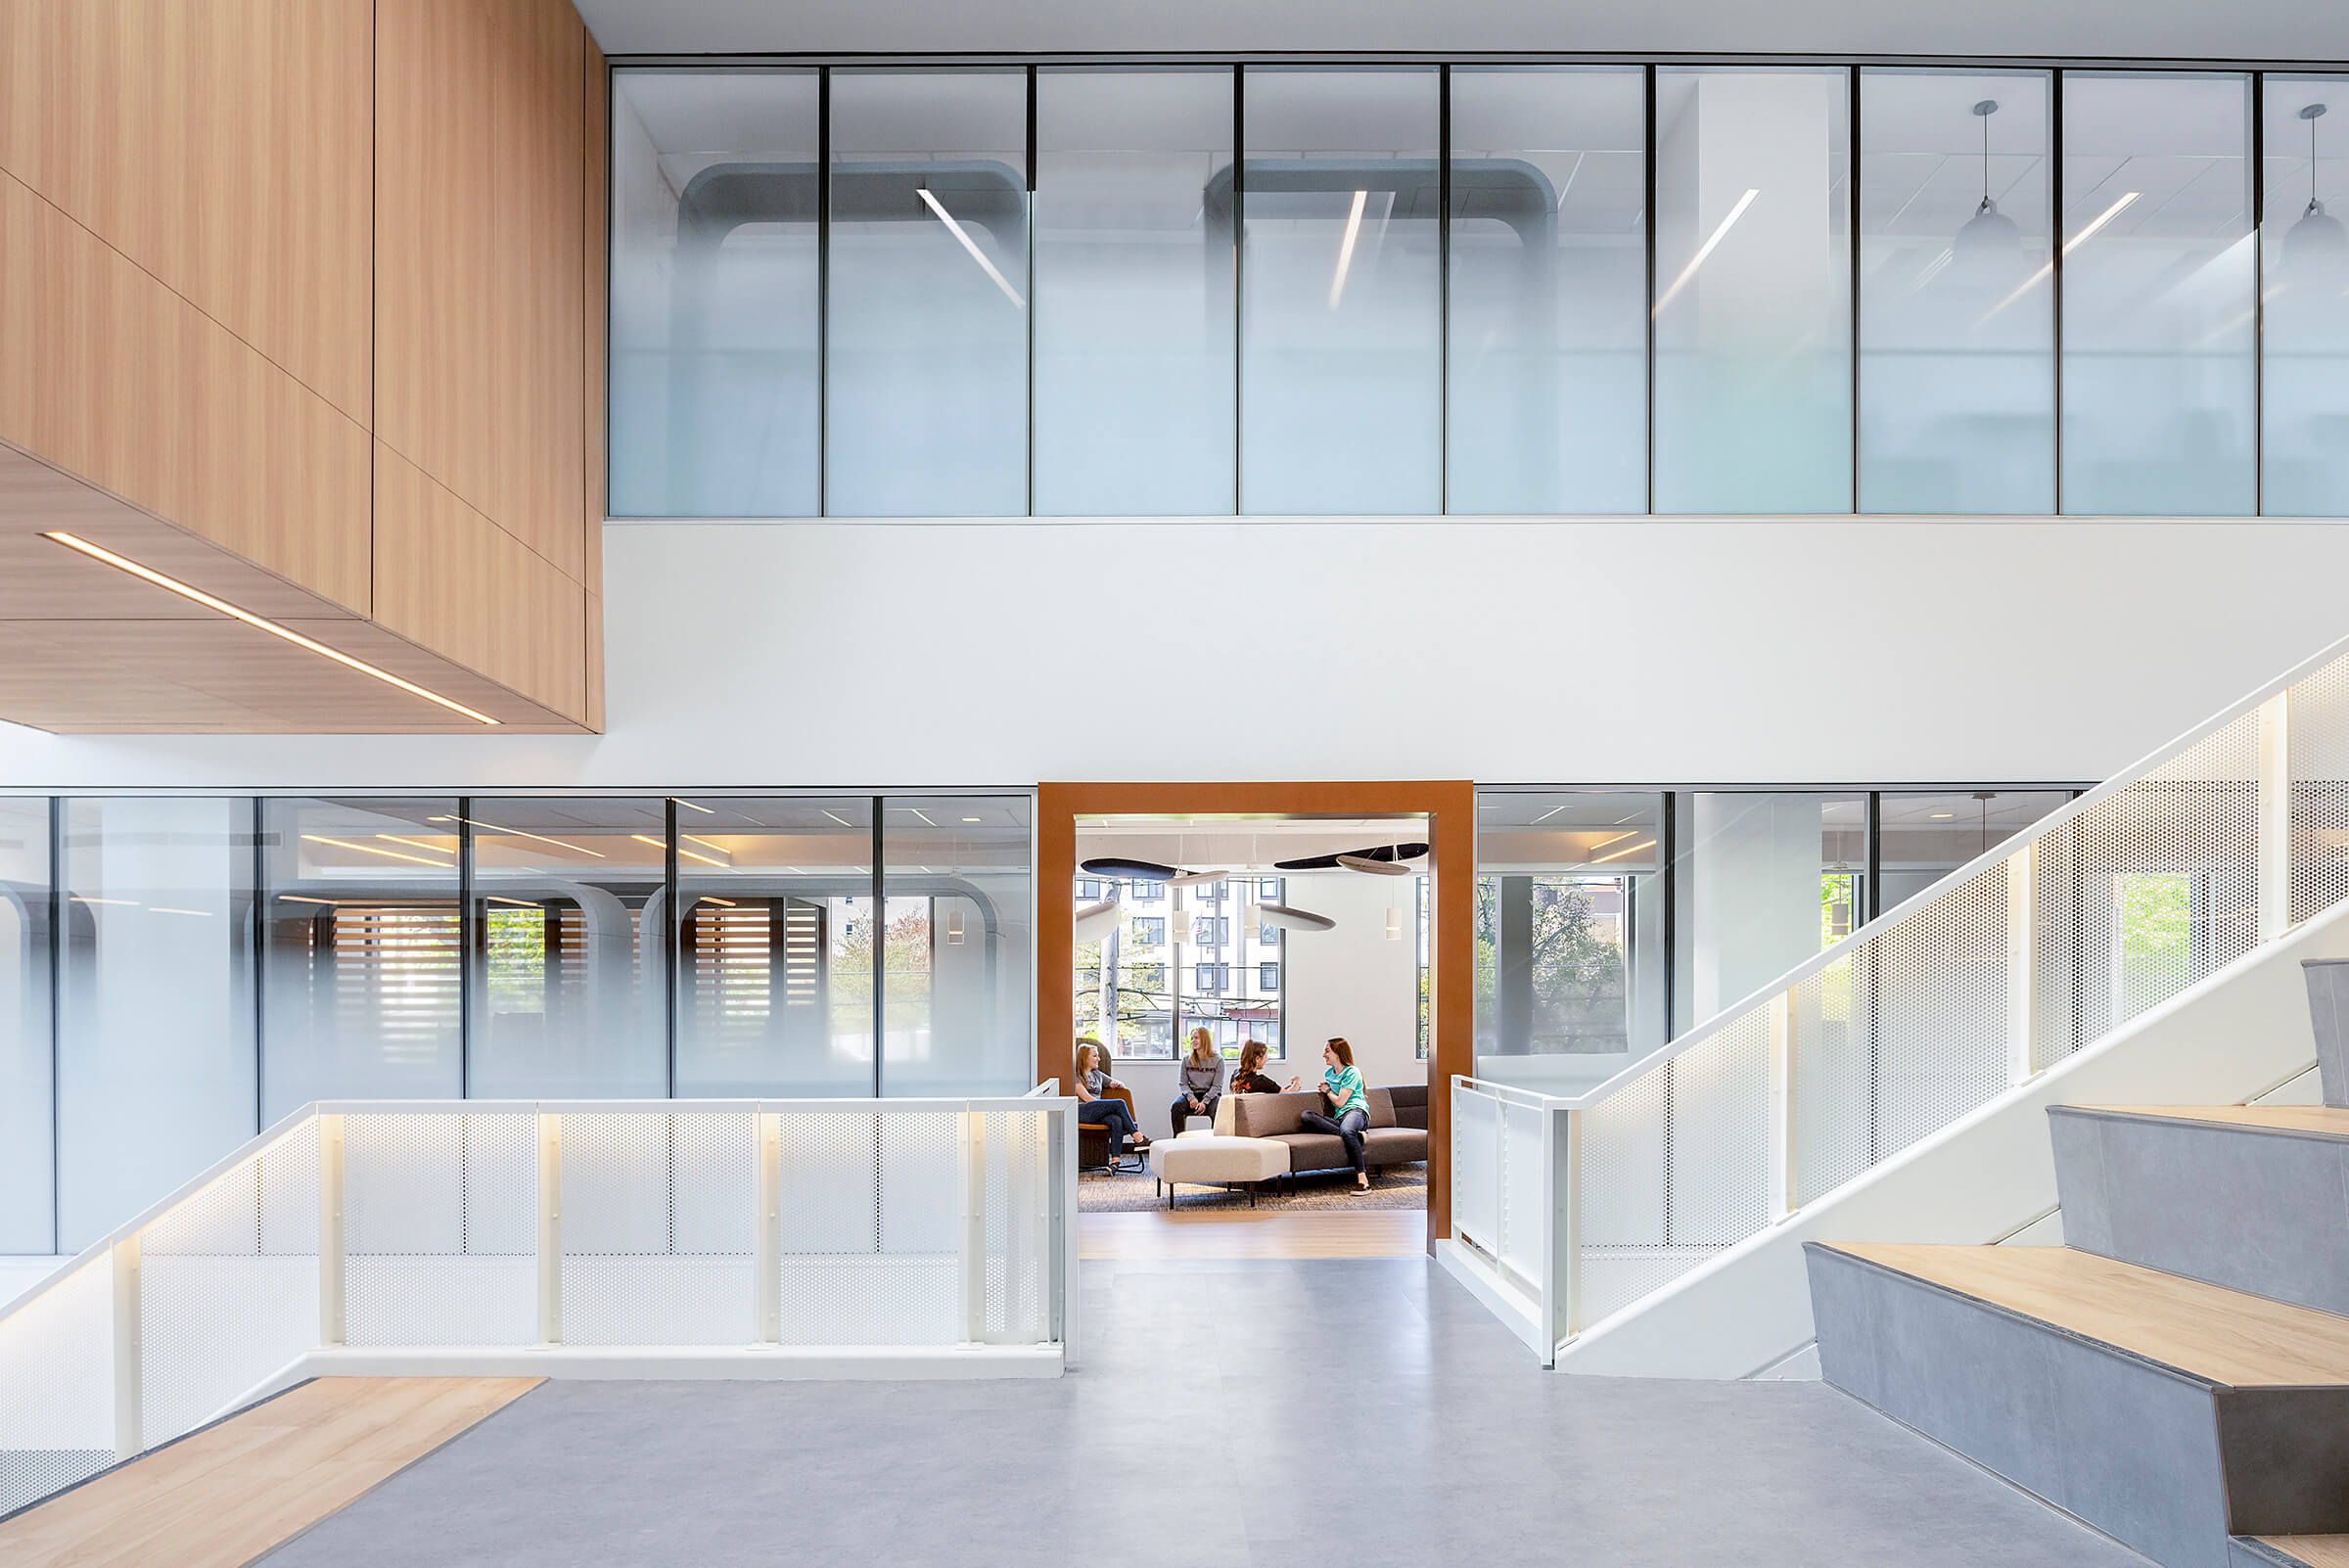 inside the D’Youville Health Professions Hub, a meeting room wedged between two floors